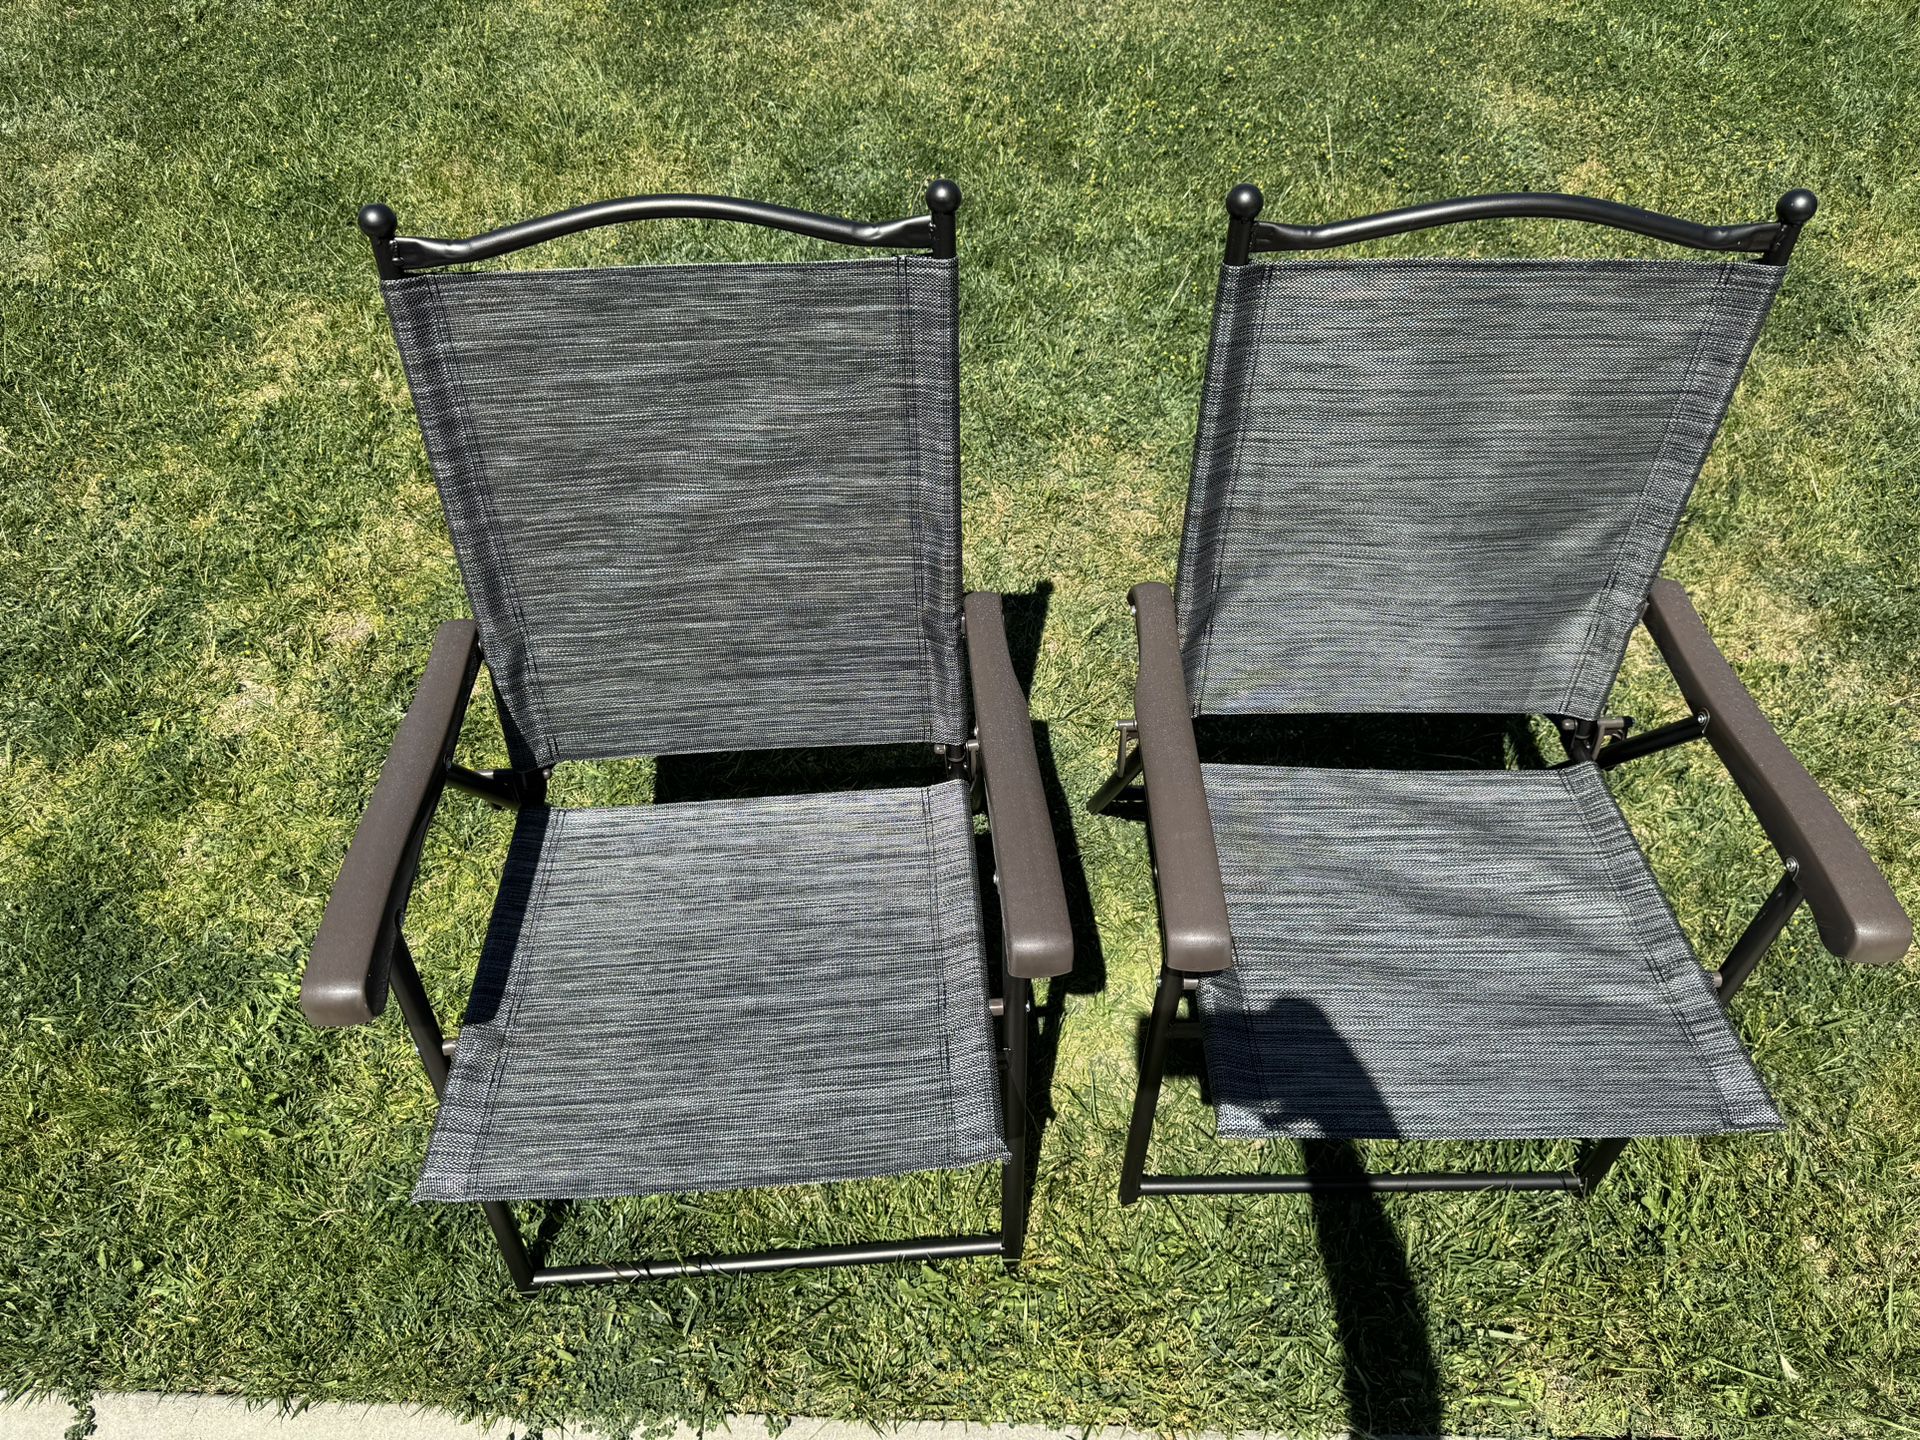 Set of 2 Patio Folding Sling Back Chairs Camping Deck Garden Beach Gray New!